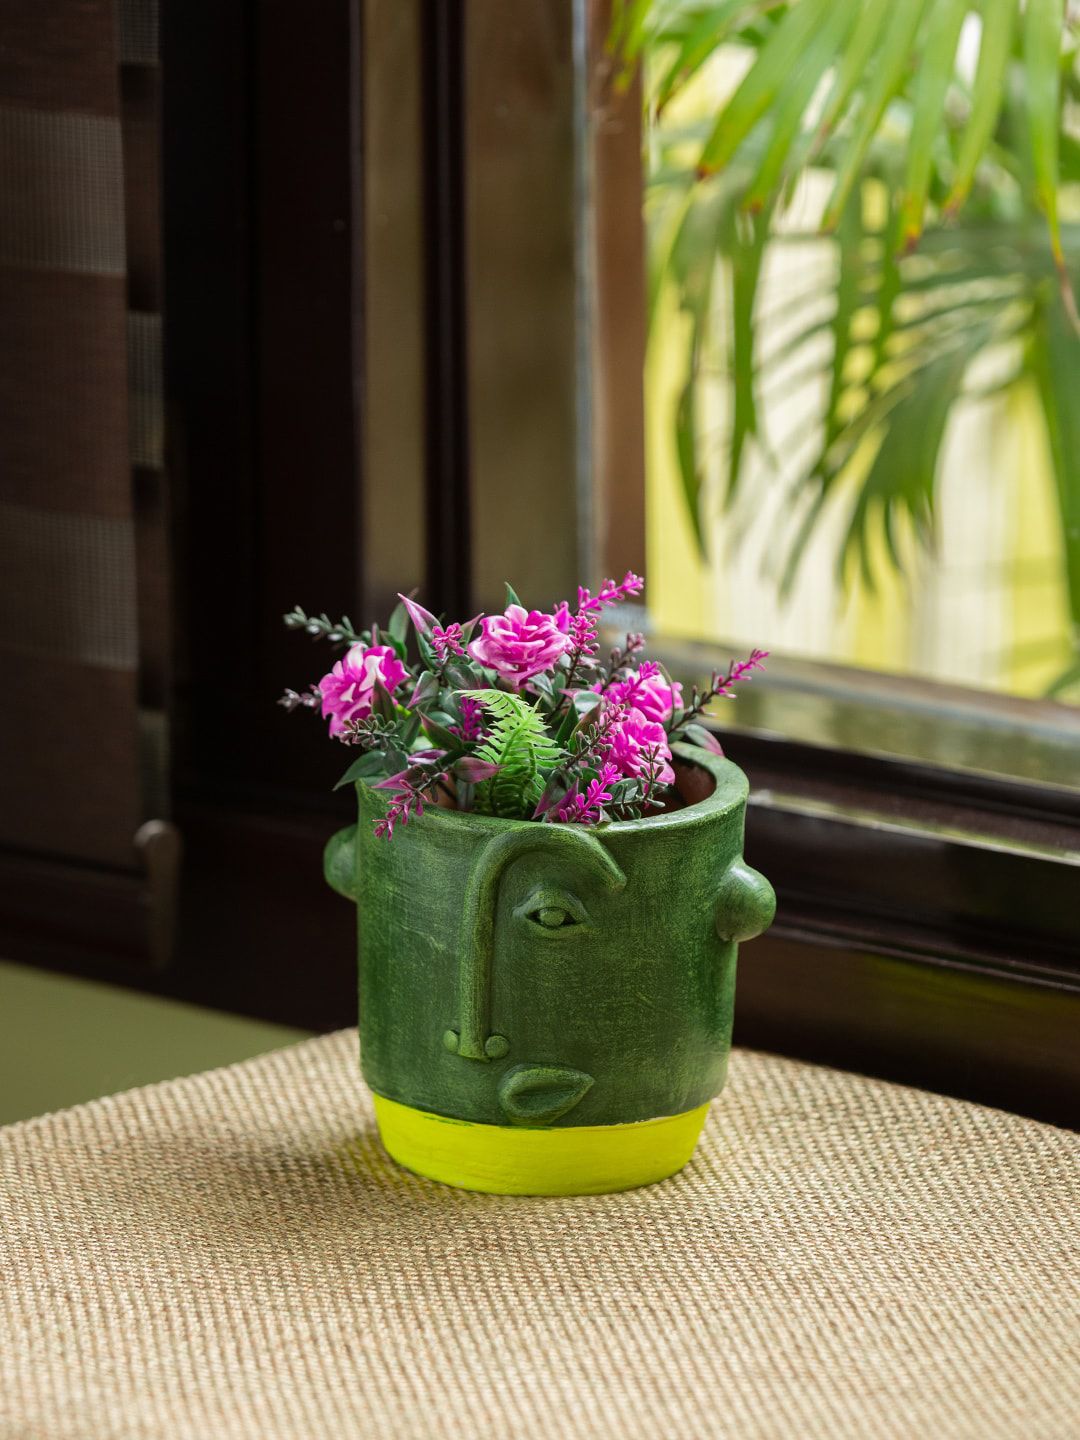 ExclusiveLane Green Abstract Face Handmade Terracotta Table Planter Pot Price in India